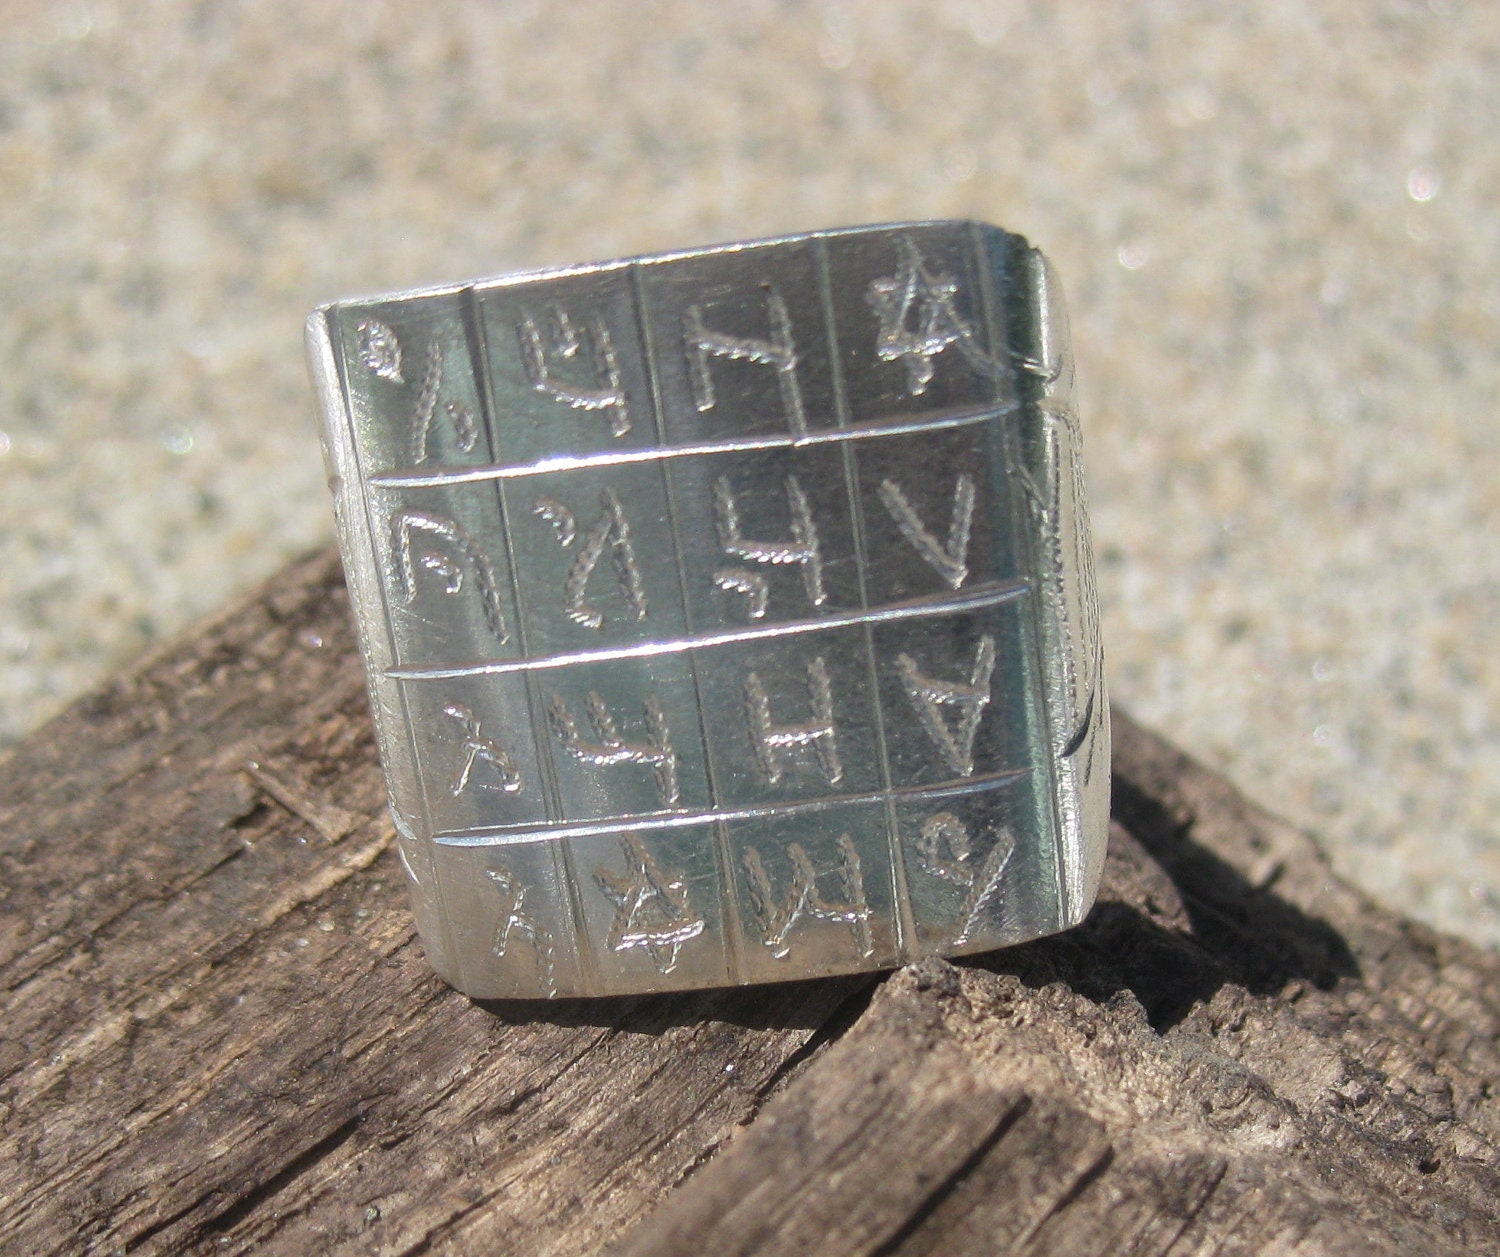 Silver Talisman Ring with Etched Arabic Script and Symbols